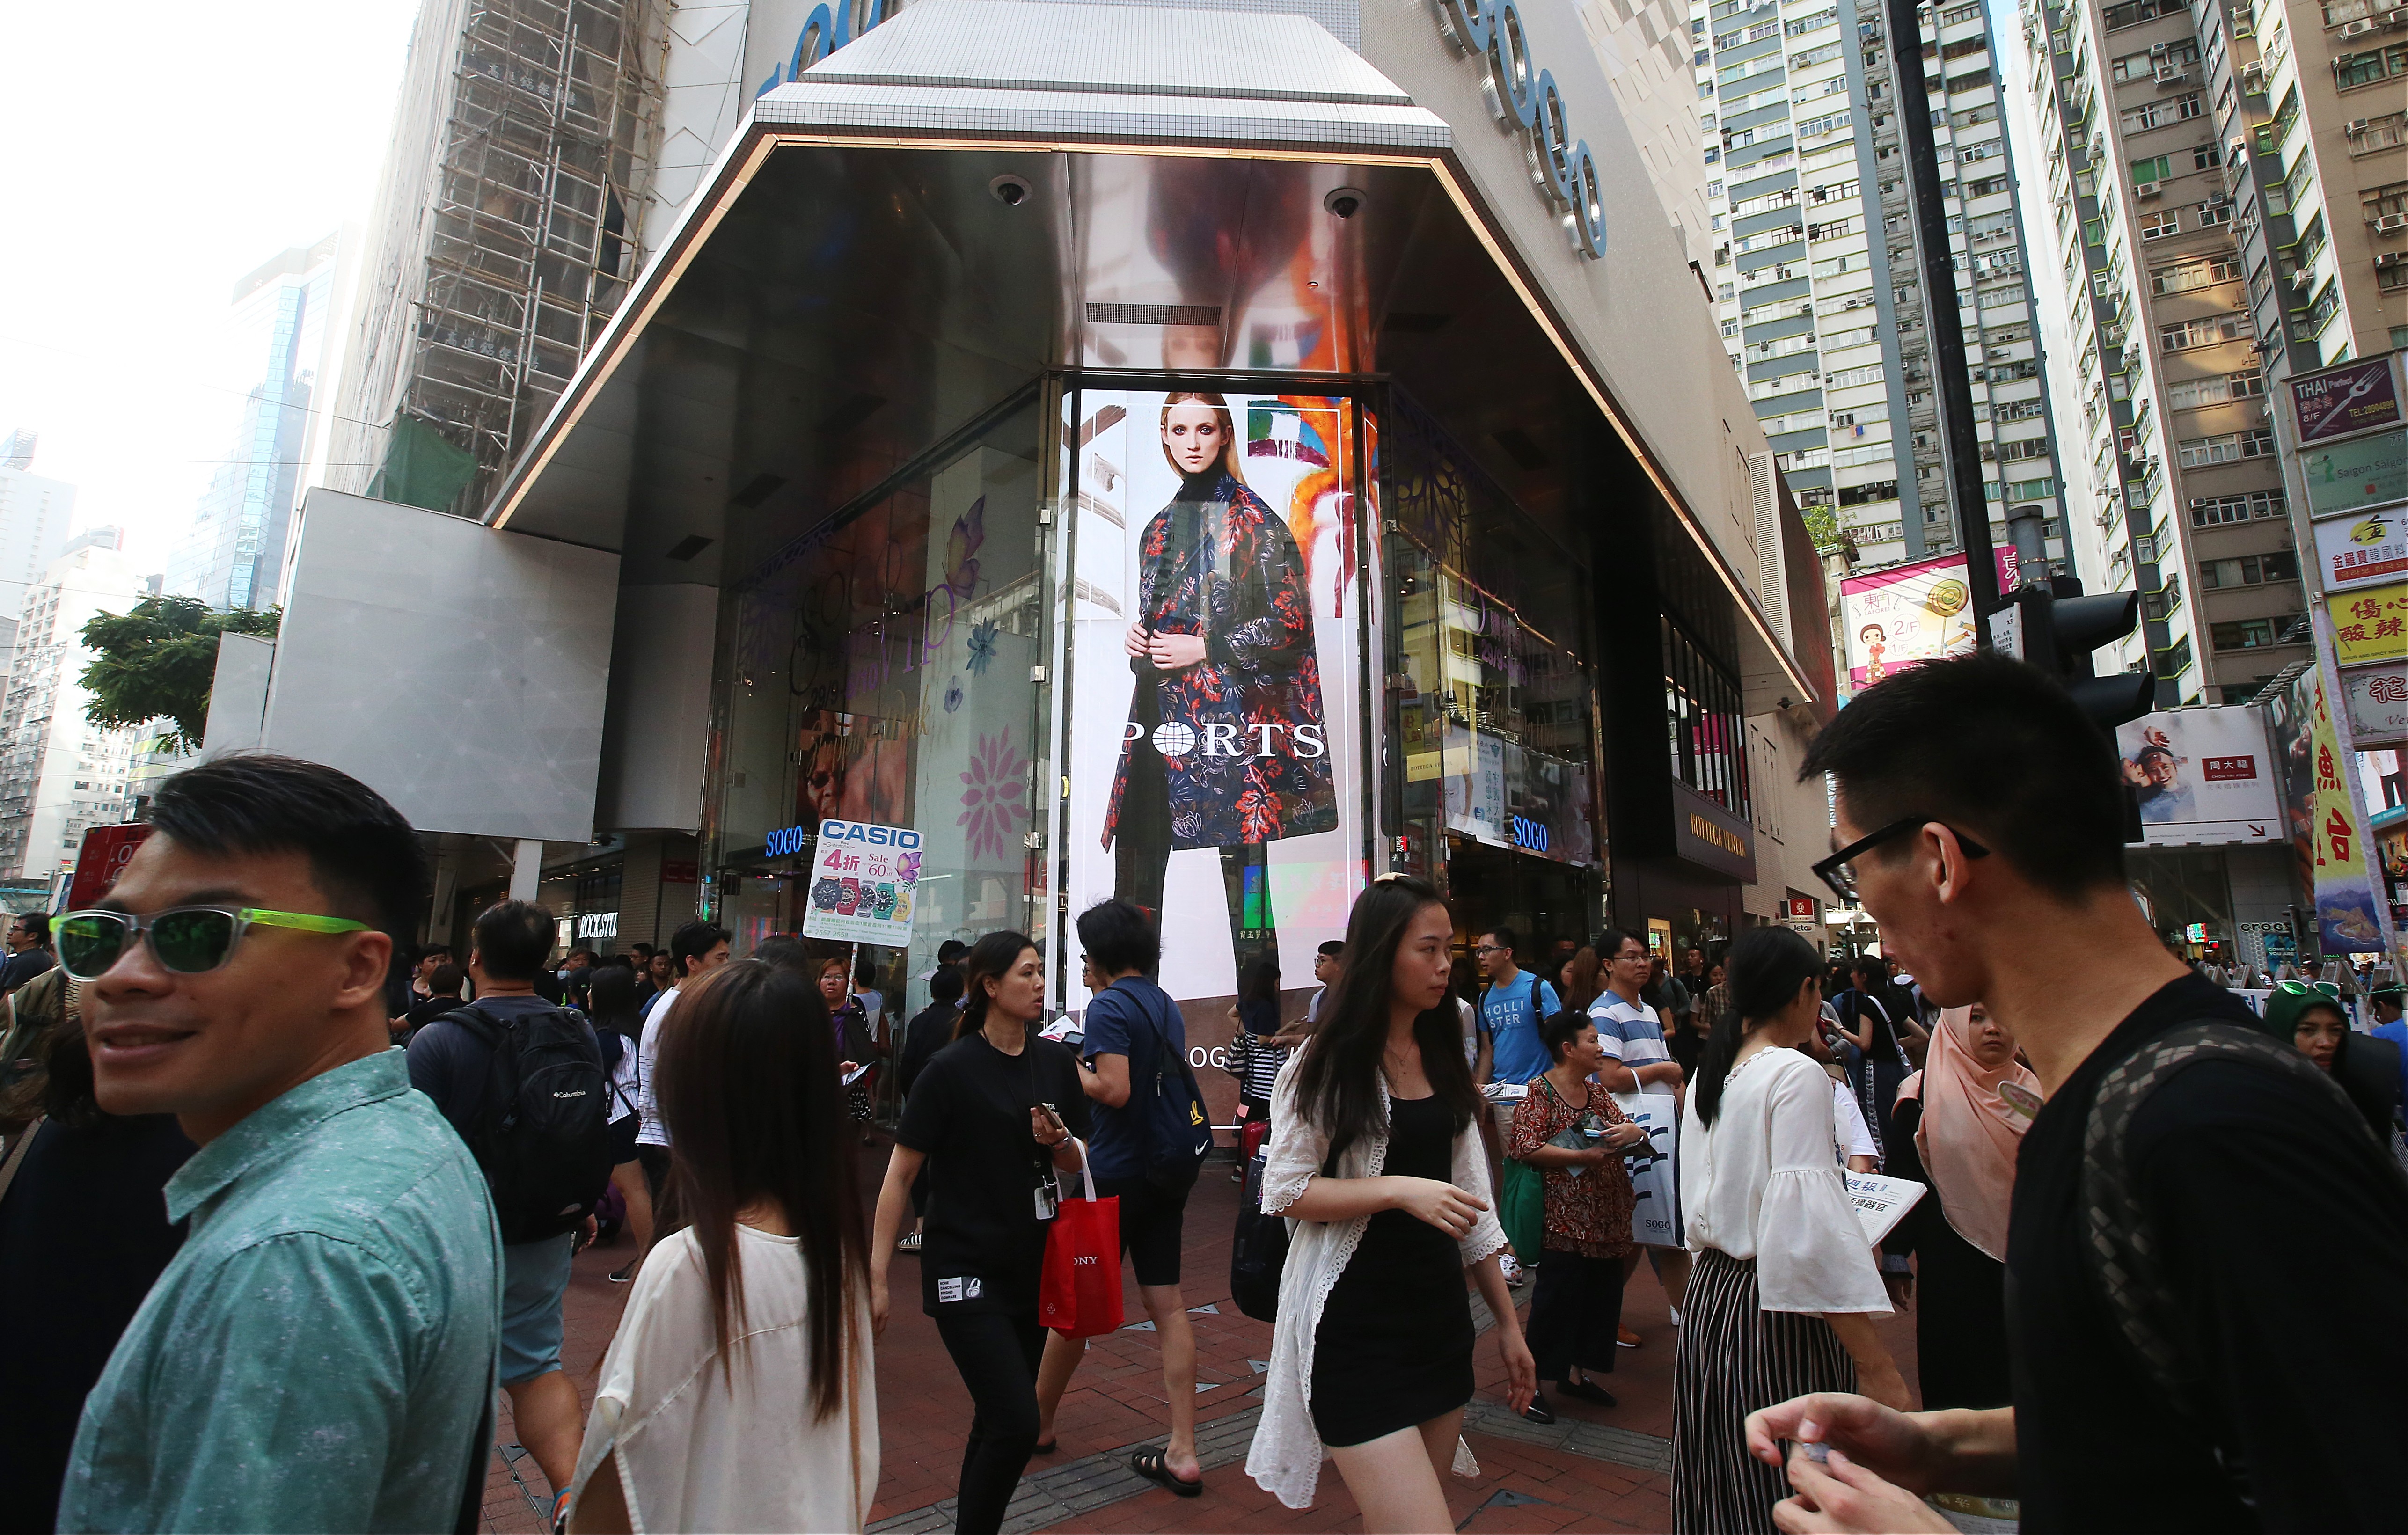 Mainland Chinese tourists are seen at the shopping area in Causeway Bay during the ‘Golden Week’ holiday period. Causeway Bay has emerged as the most expensive retail space in Asia, and the second most expensive in the world after New York’s Upper 5th Avenue. Photo: K.Y. Cheng